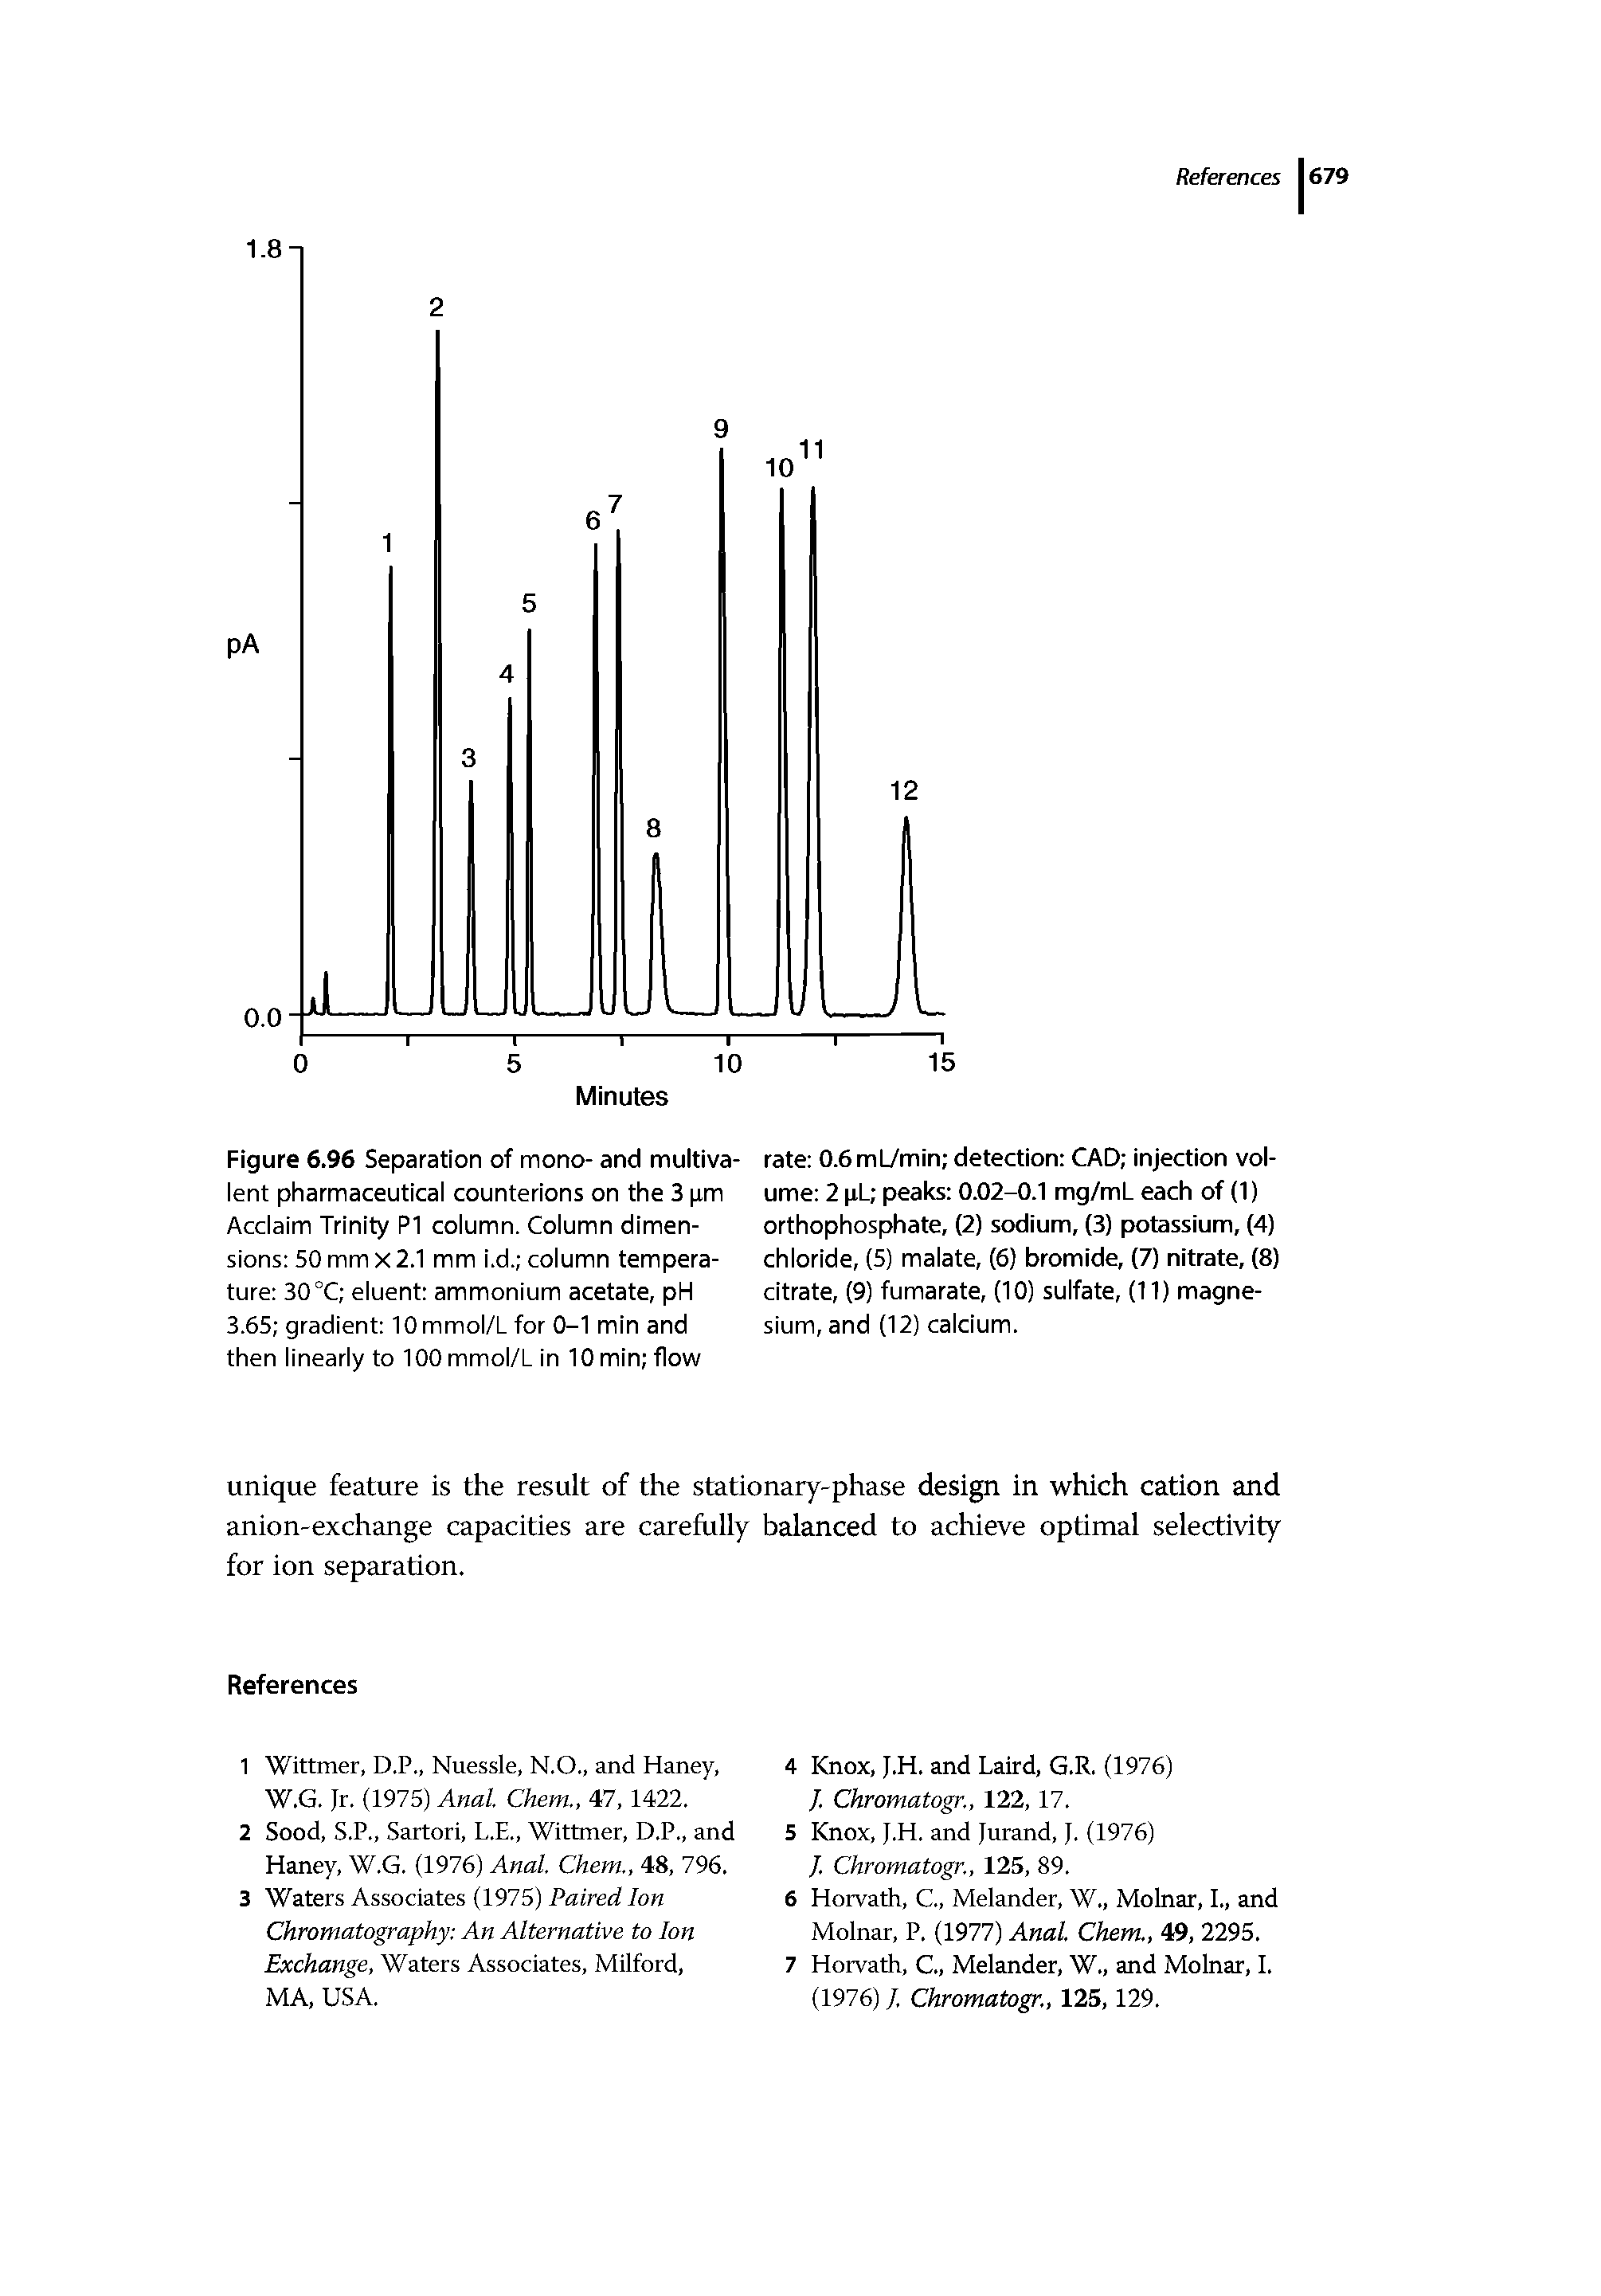 Figure 6.96 Separation of mono- and multivalent pharmaceutical counterions on the 3 pm Acclaim Trinity PI column. Column dimensions 50 mm X 2.1 mm i.d. column temperature 30 °C eluent ammonium acetate, pH 3.65 gradient lOmmol/L for 0-1 min and then linearly to 100 mmol/L in 10 min flow...